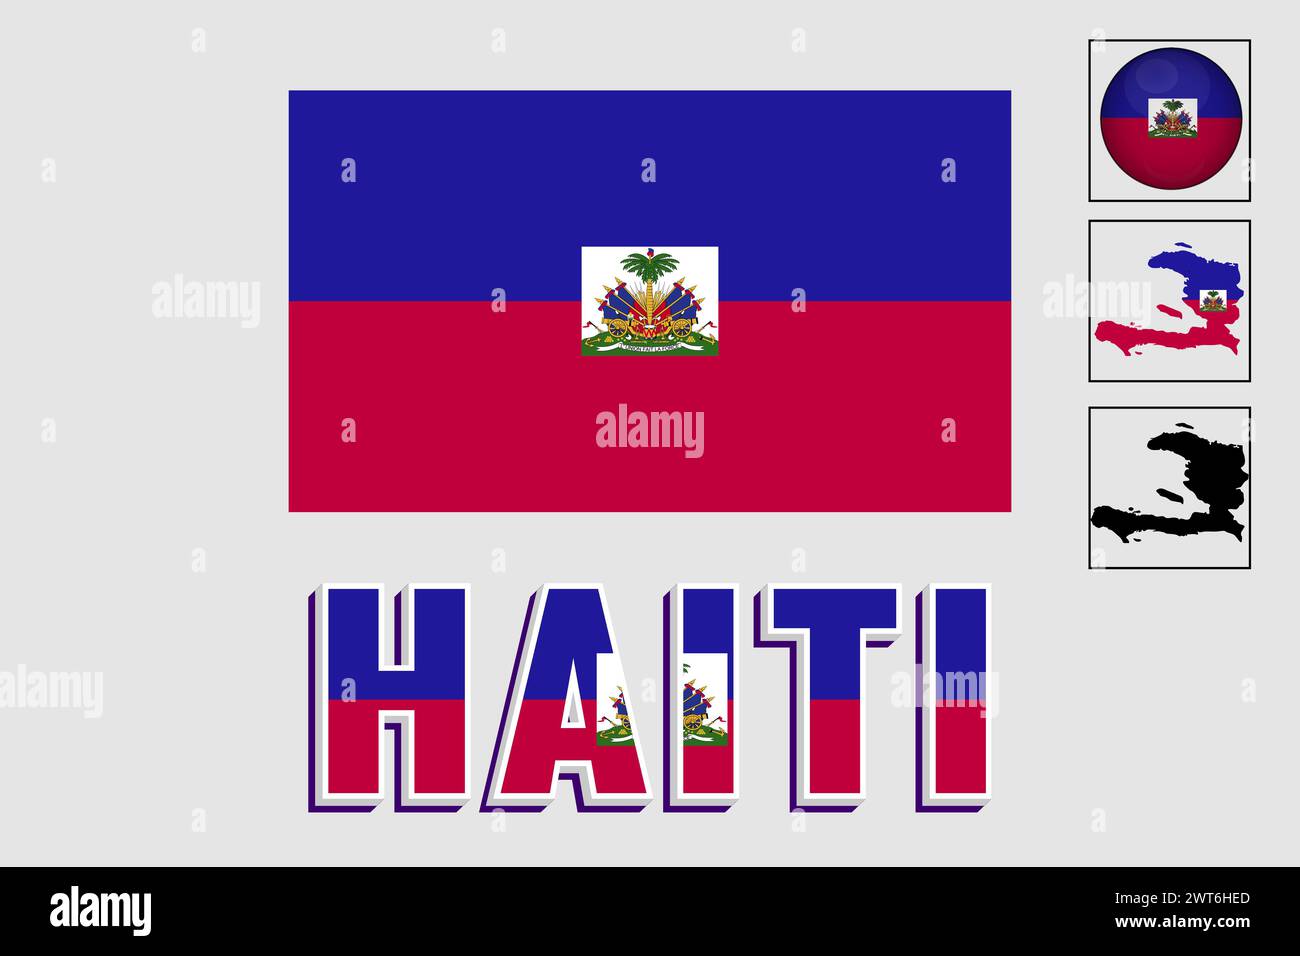 Haiti map and flag in vector illustration Stock Vector